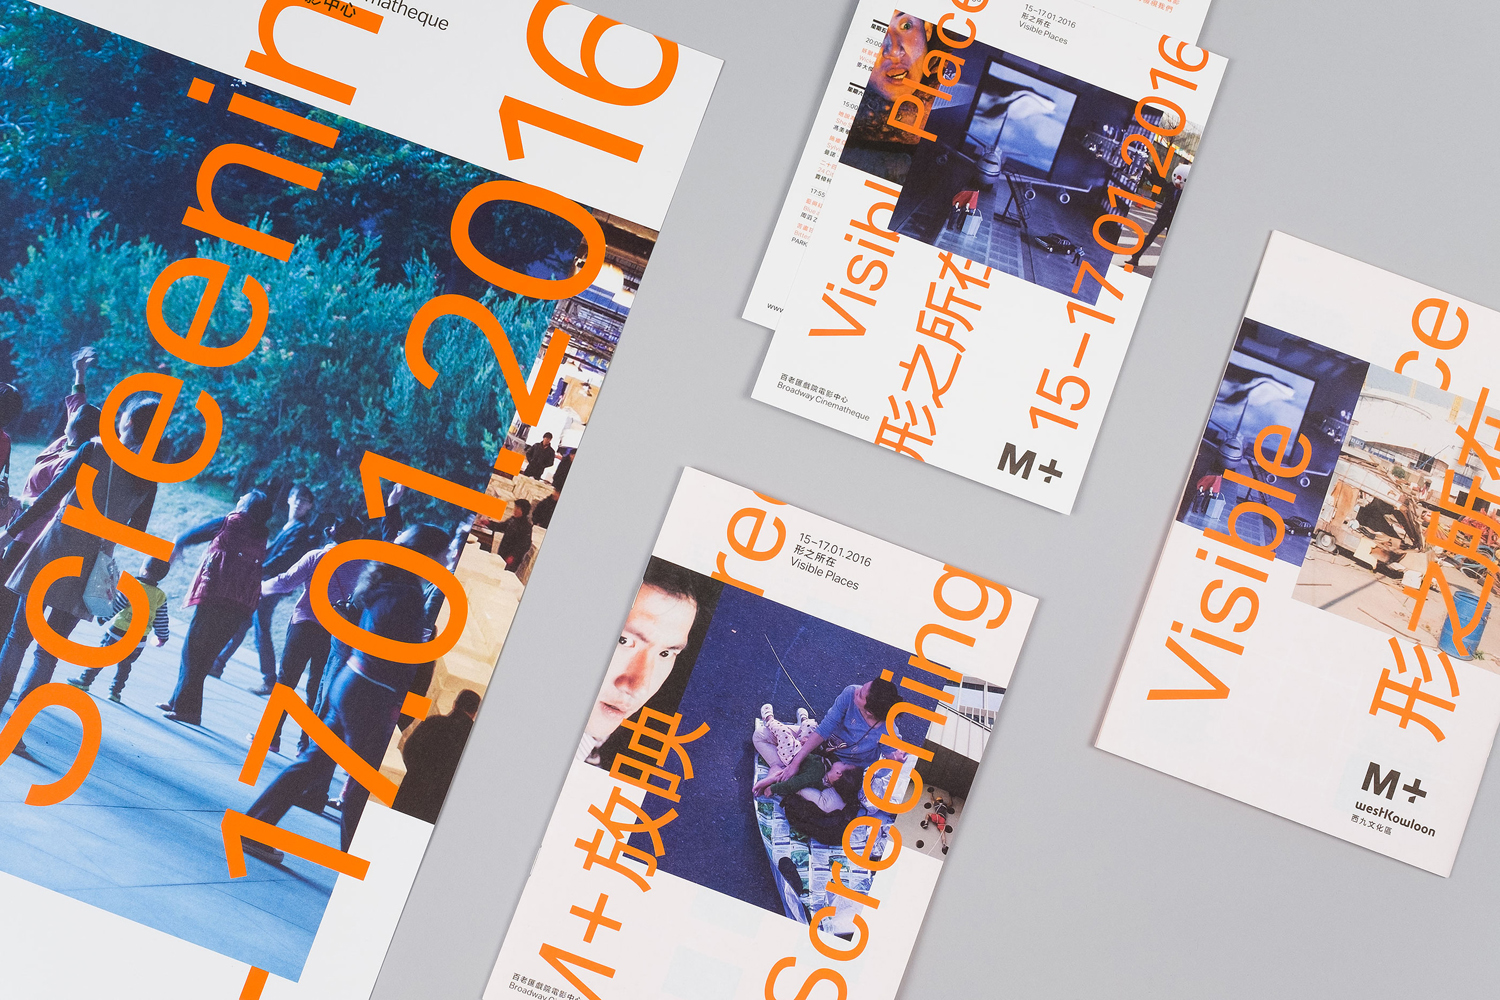 Branding for Hong Kong festival M+ Screenings by Project Projects, United States